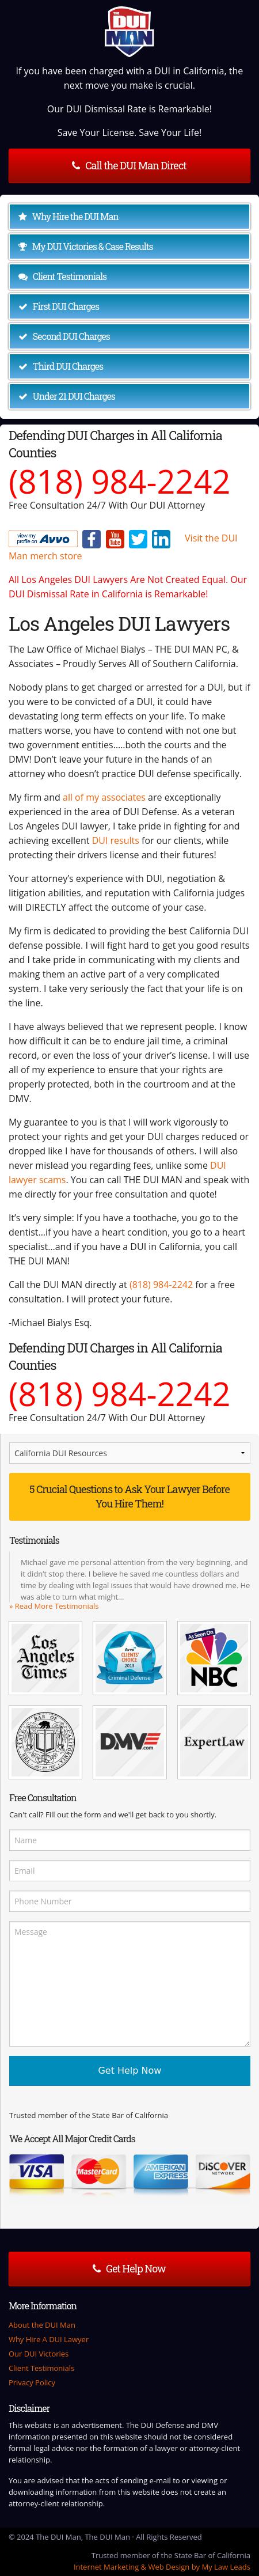 The DUI Man - West Hills Law Offices of Michael Bialys - West Hills CA Lawyers